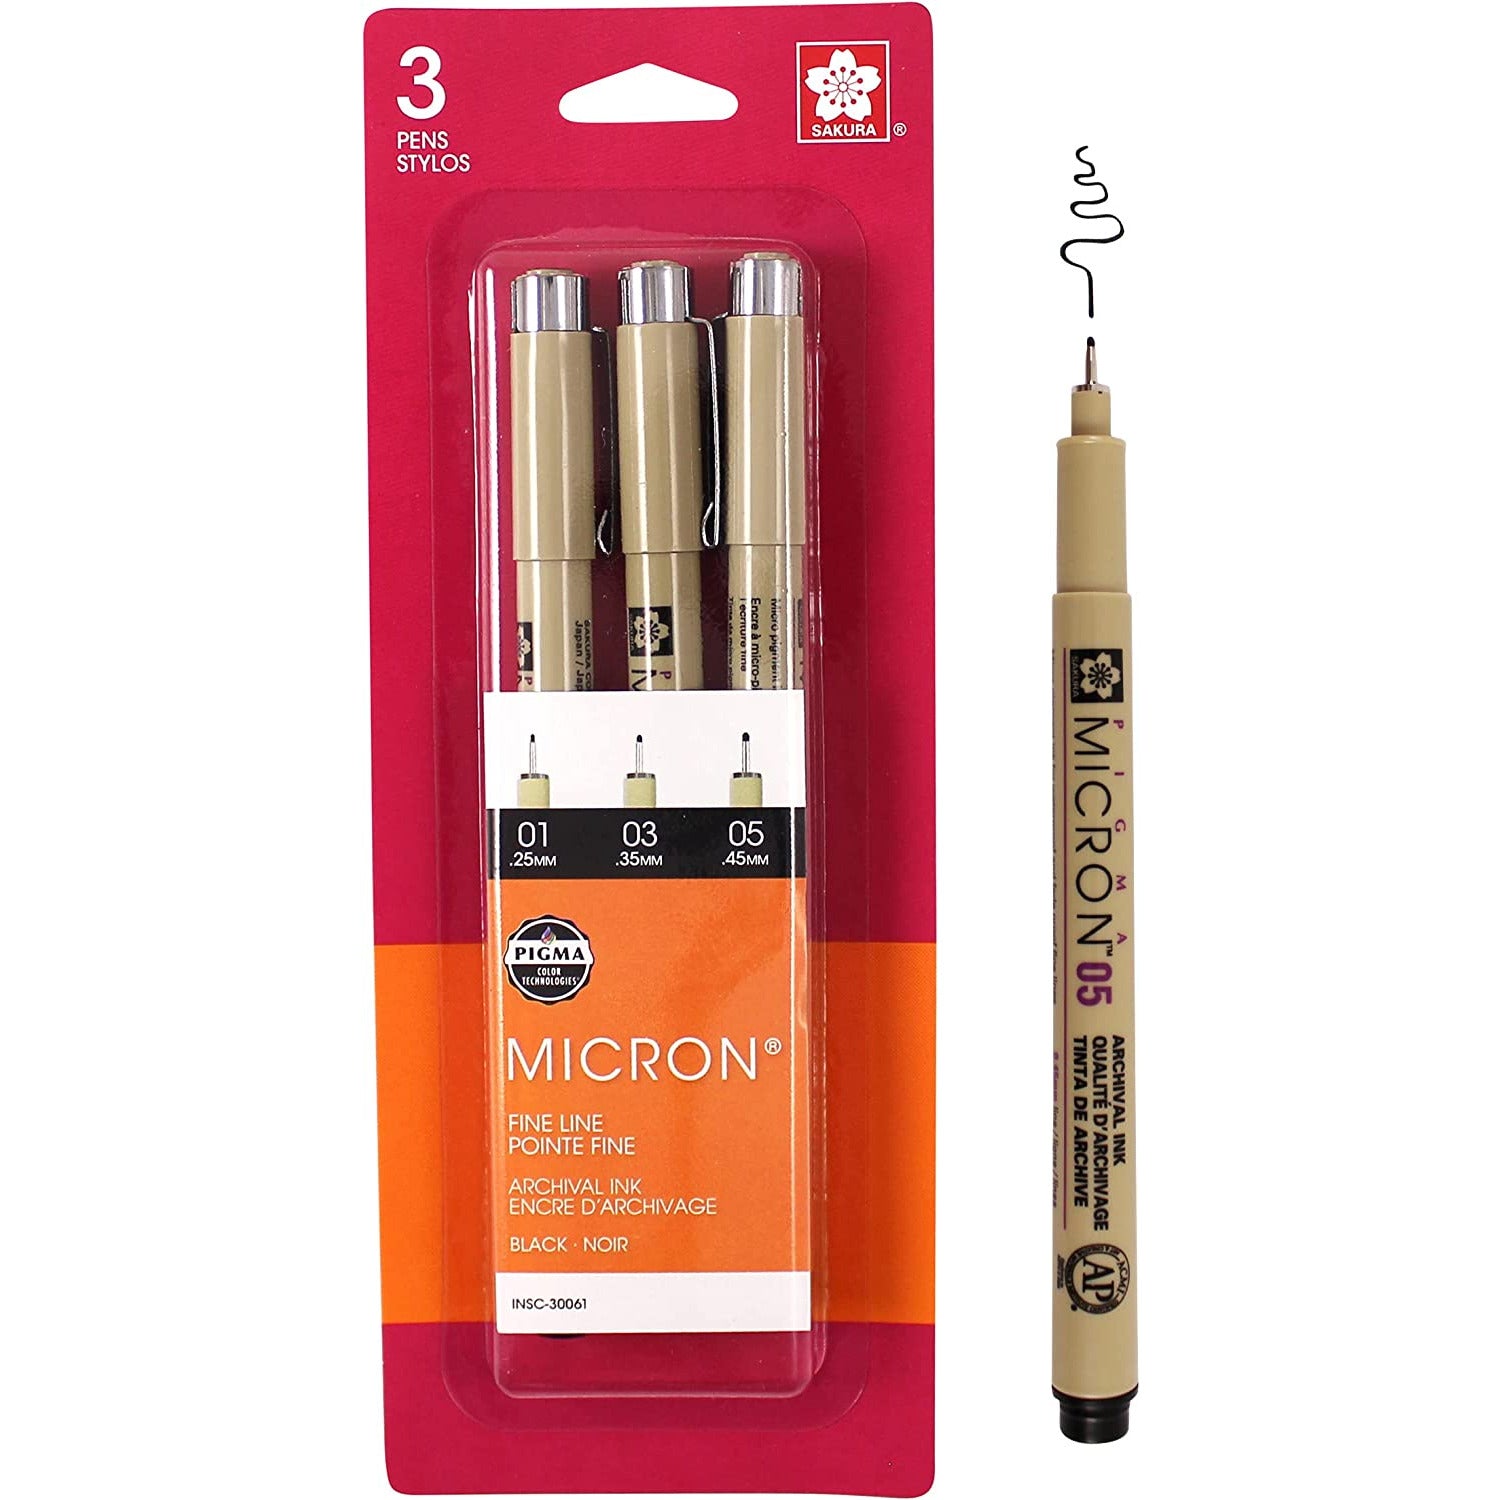 Illustration Pen (Sigma Micron) Drawing & Painting Kits Silver Lead 3 Pack